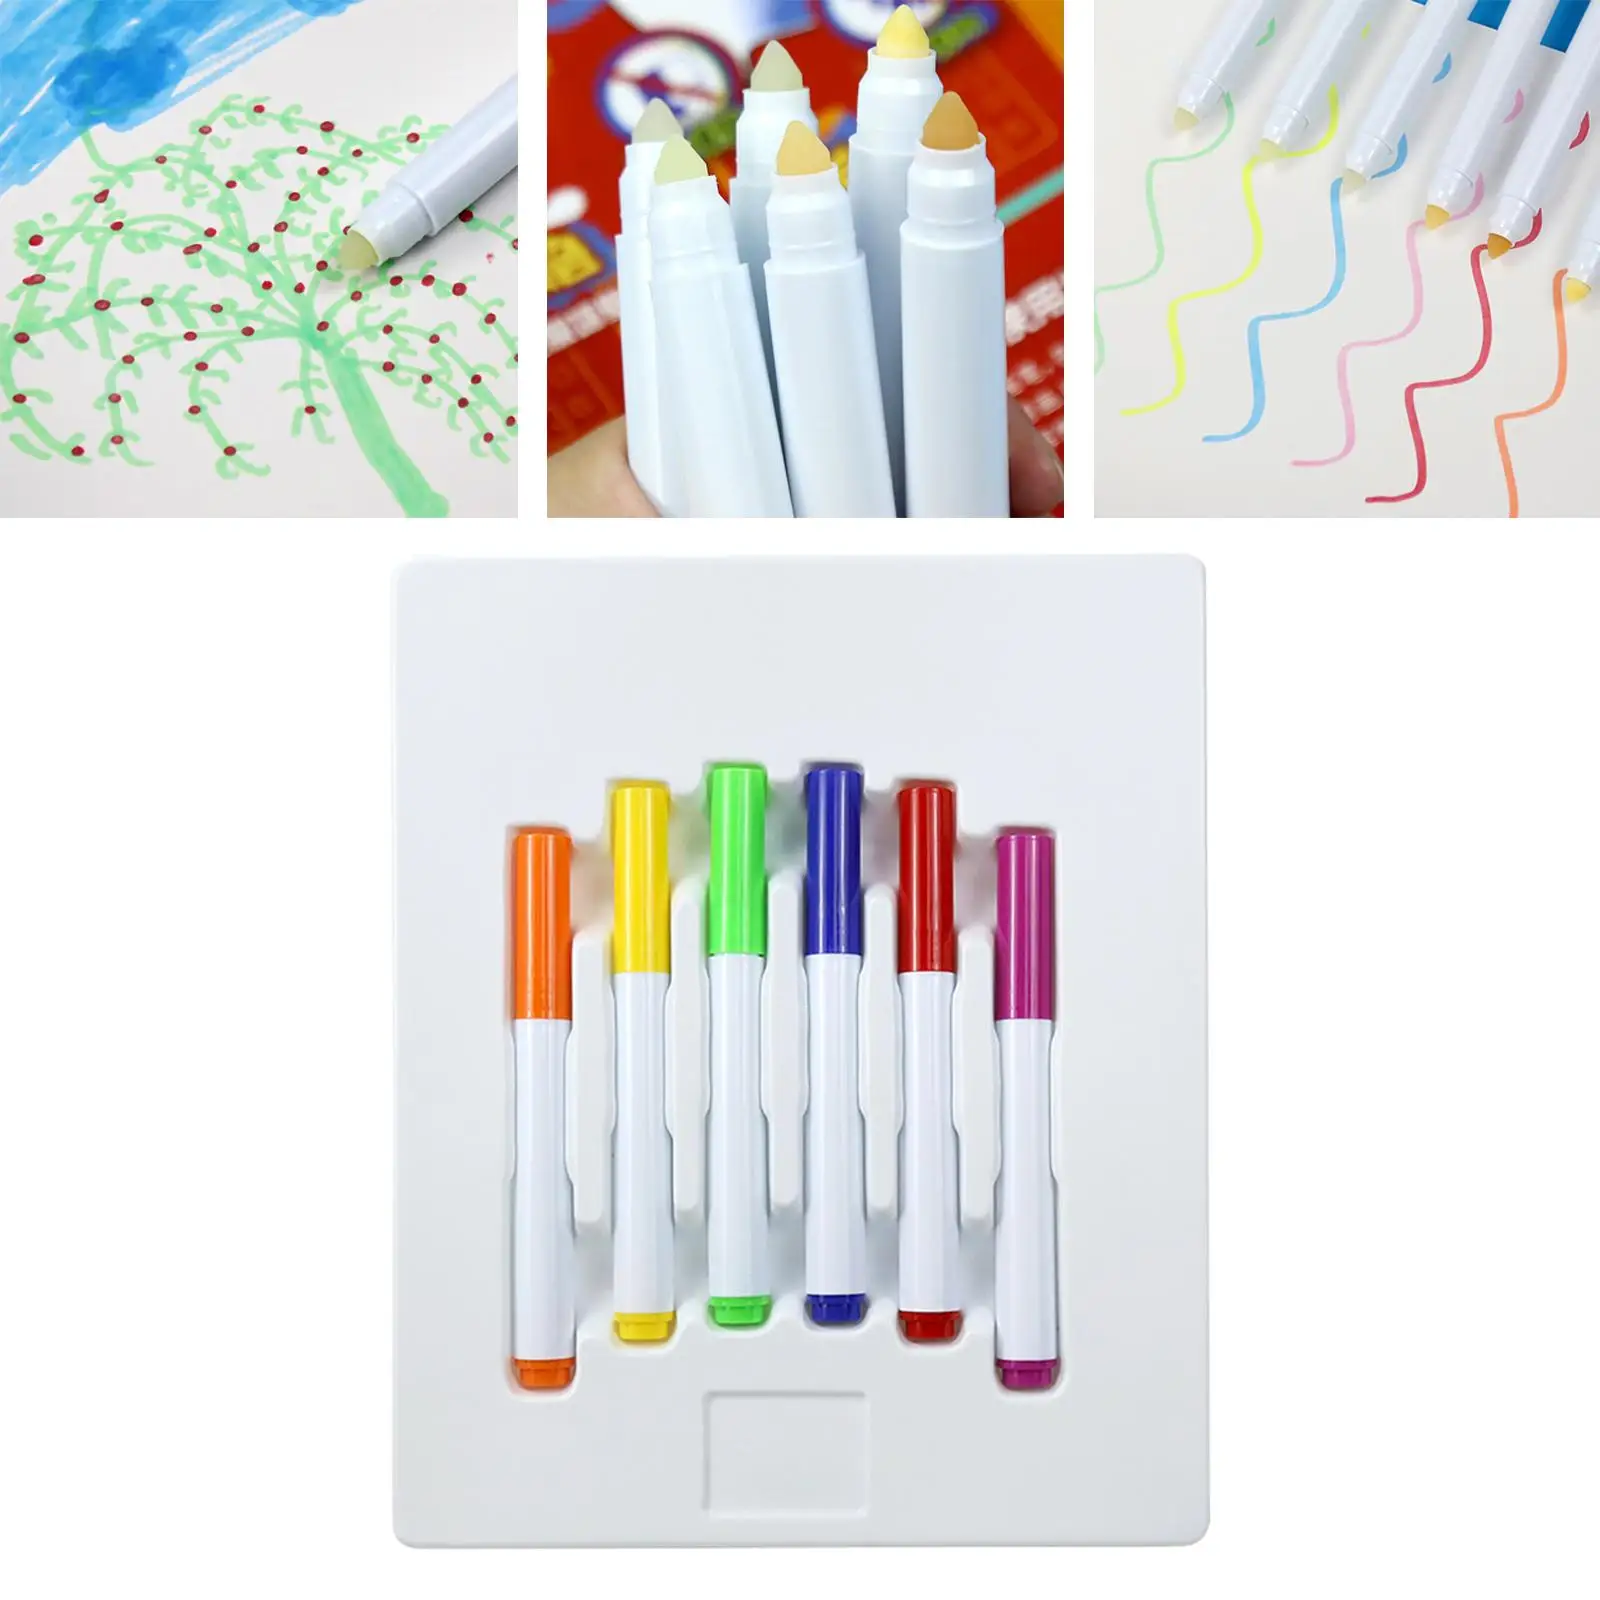 6 Smudge Drawing Pens Paint Pens Stationery Supplies Pens Set Calligraphy Pens for Special Paper DIY Note Taking